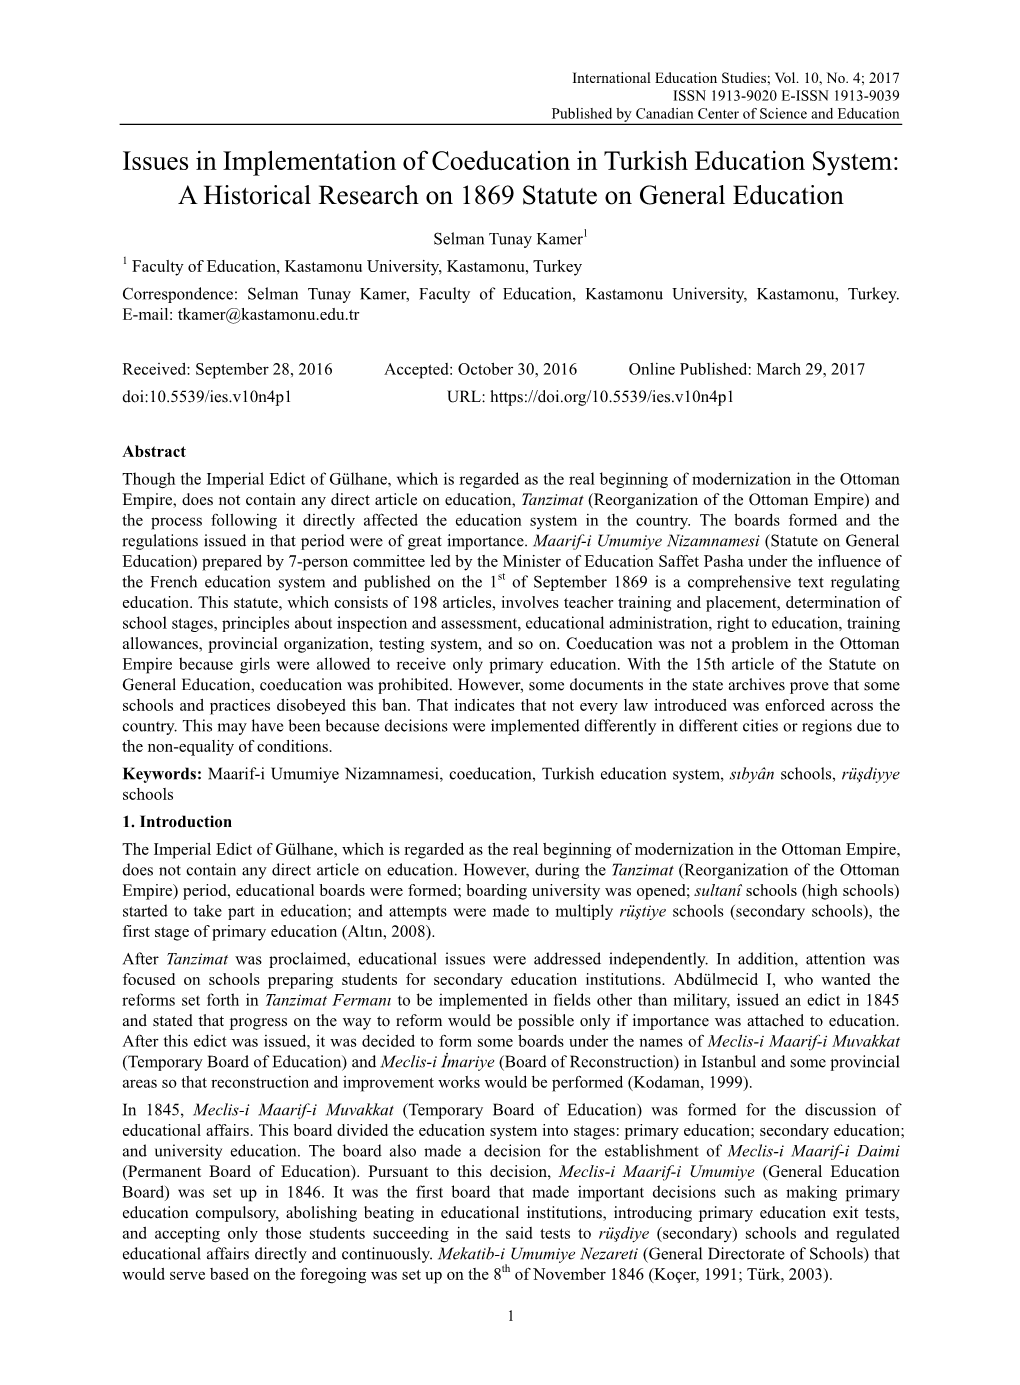 Issues in Implementation of Coeducation in Turkish Education System: a Historical Research on 1869 Statute on General Education